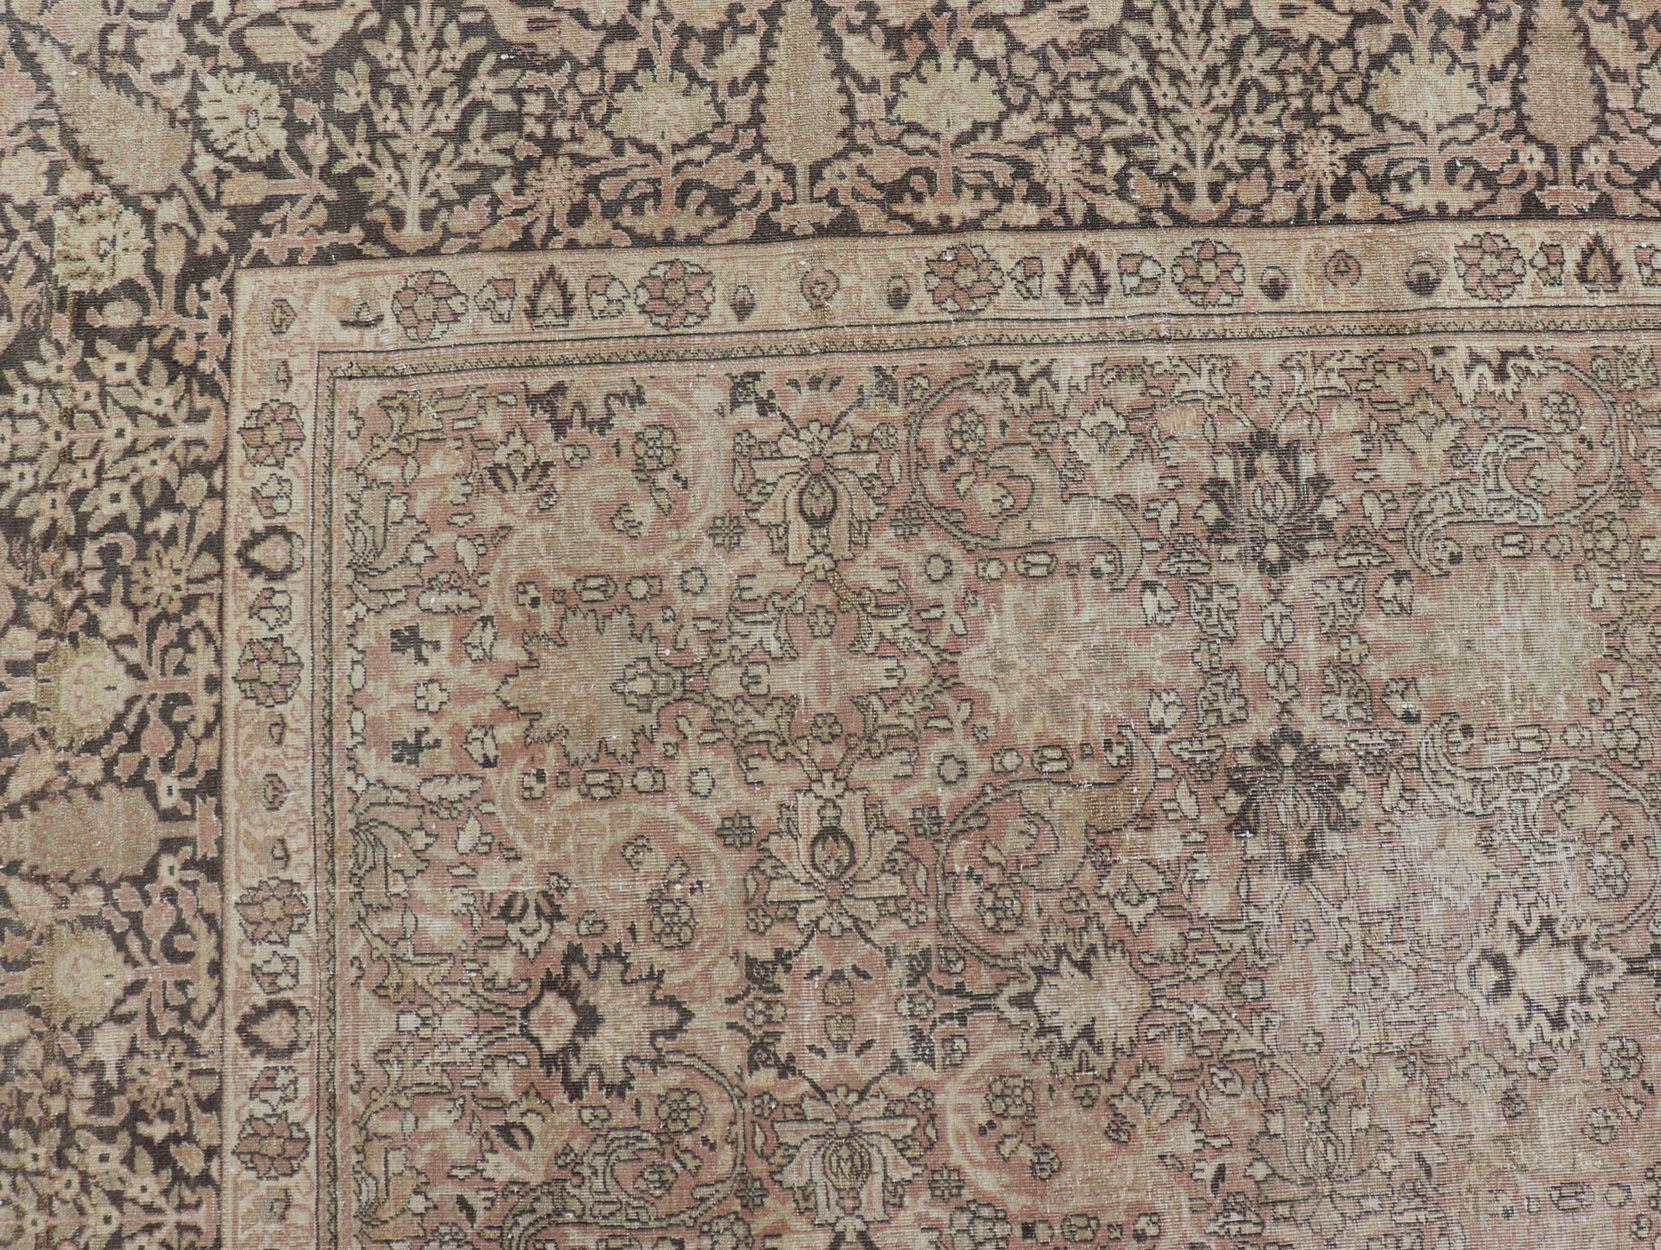 20th Century Large Antique Turkish Sivas Rug with Floral Design in Earthy Neutral Tones  For Sale